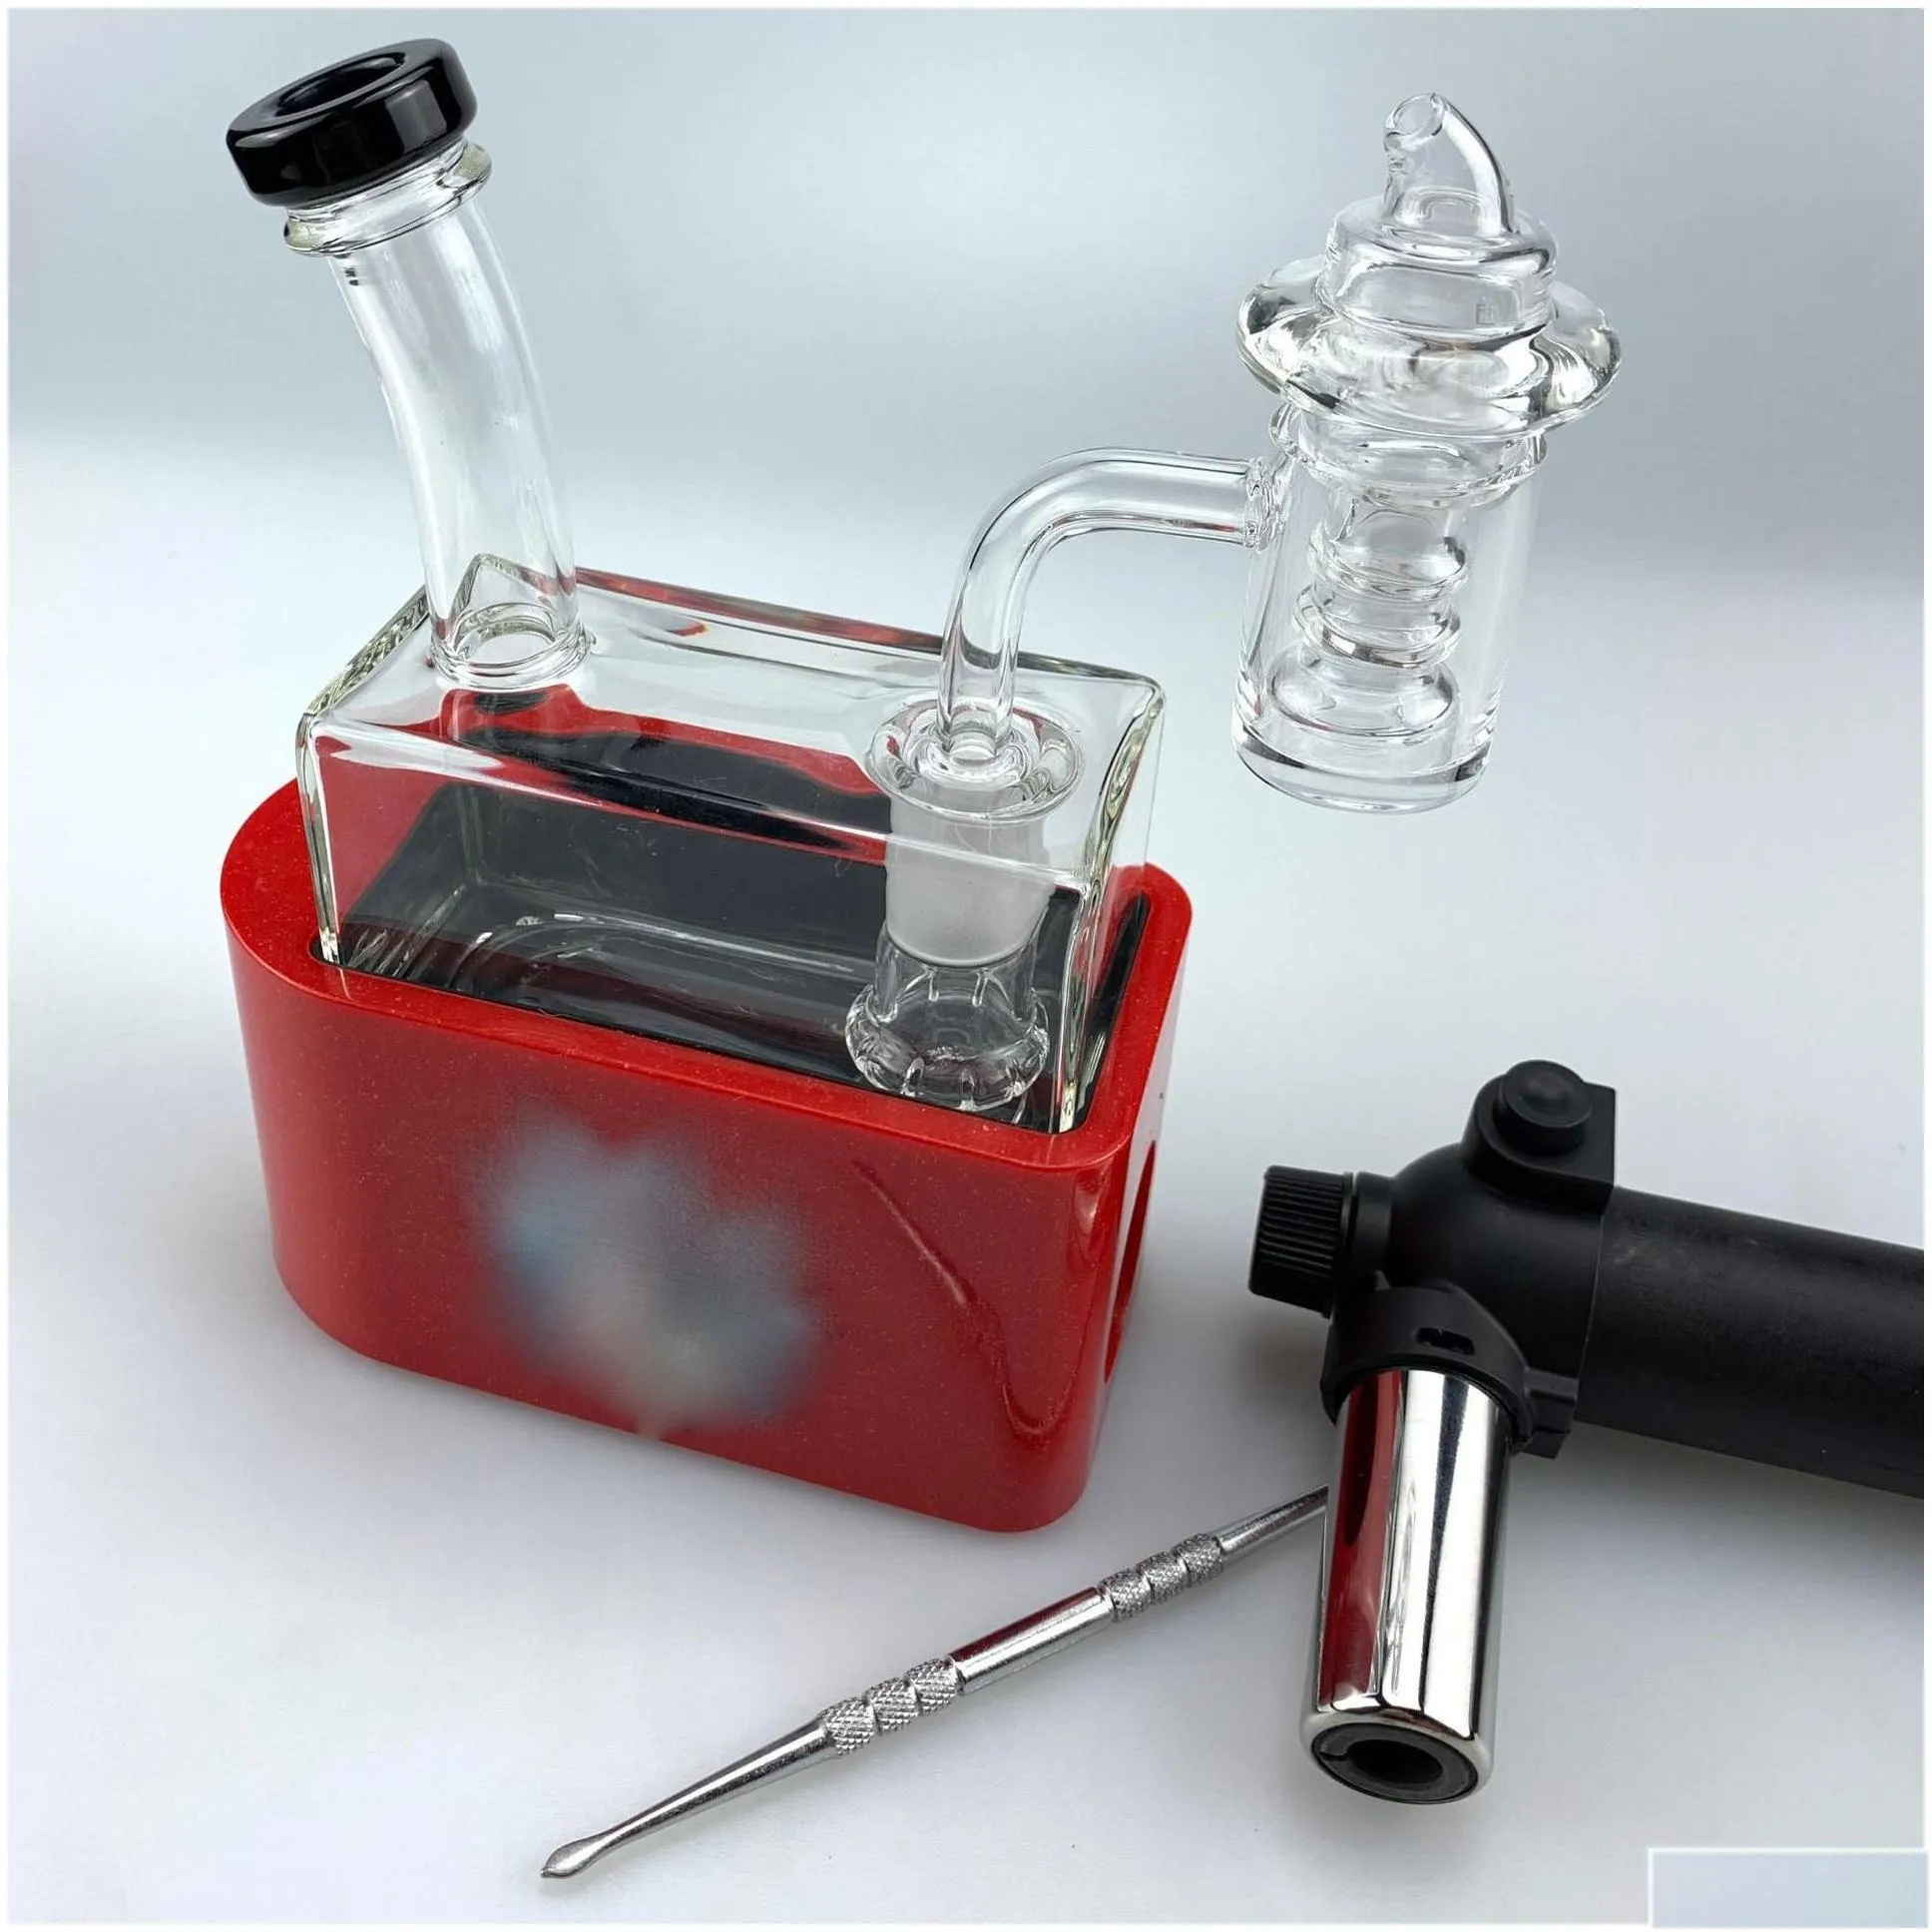 smoking pipes sale glass bong kit hookahs quadrate water pipe dab rig in ine with quartz banger carb cap accessories set for wax dro